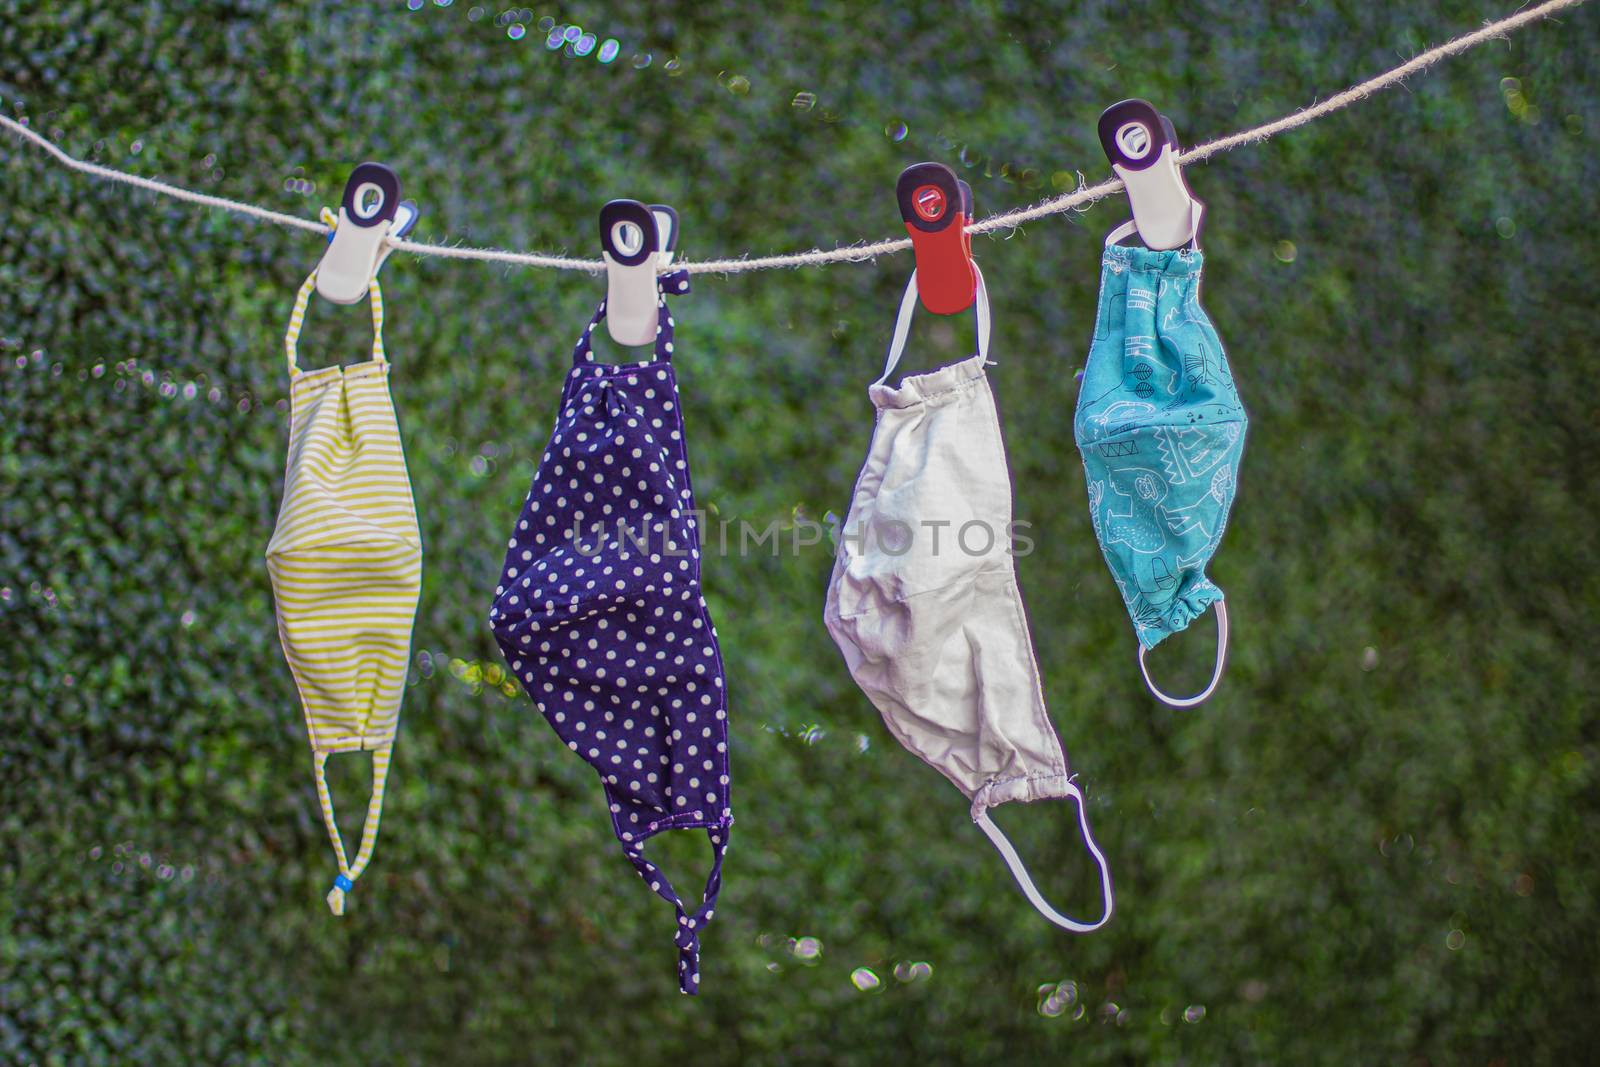 Drying outside reusable family face masks, hang on a clothesline nylon rope with clothespins.